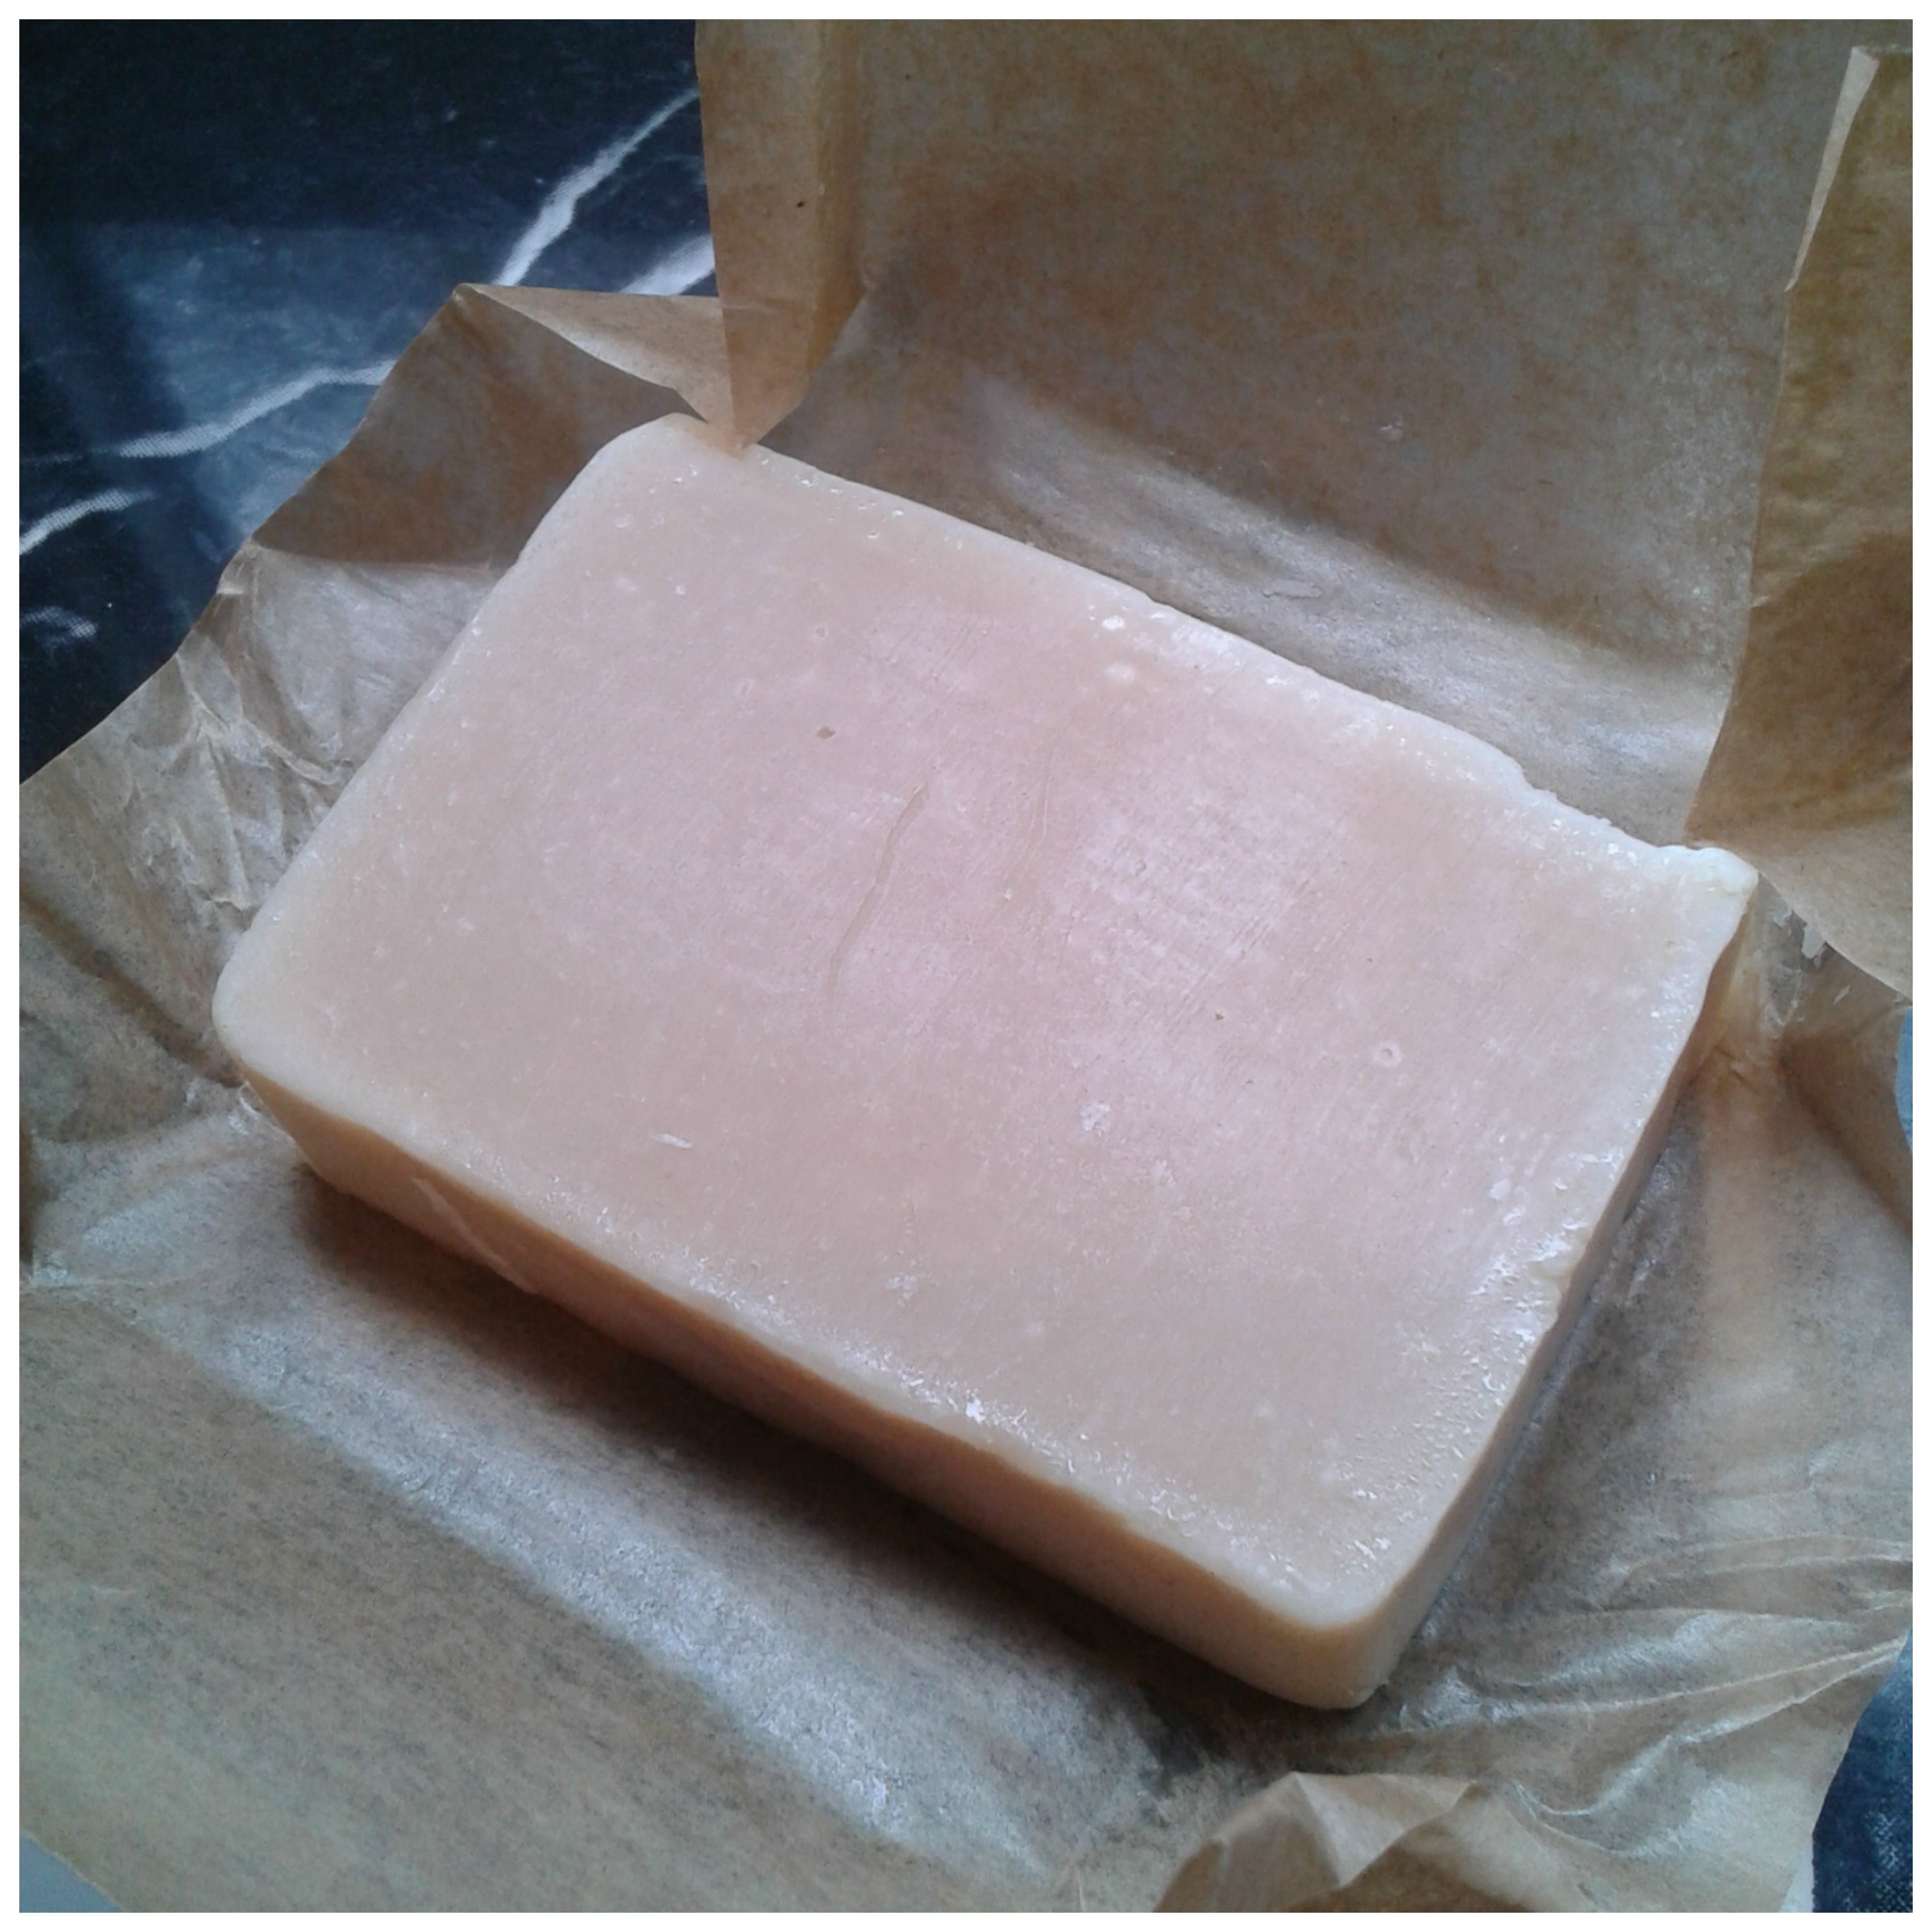 Cyril's Soap Shed Goat Milk Soap